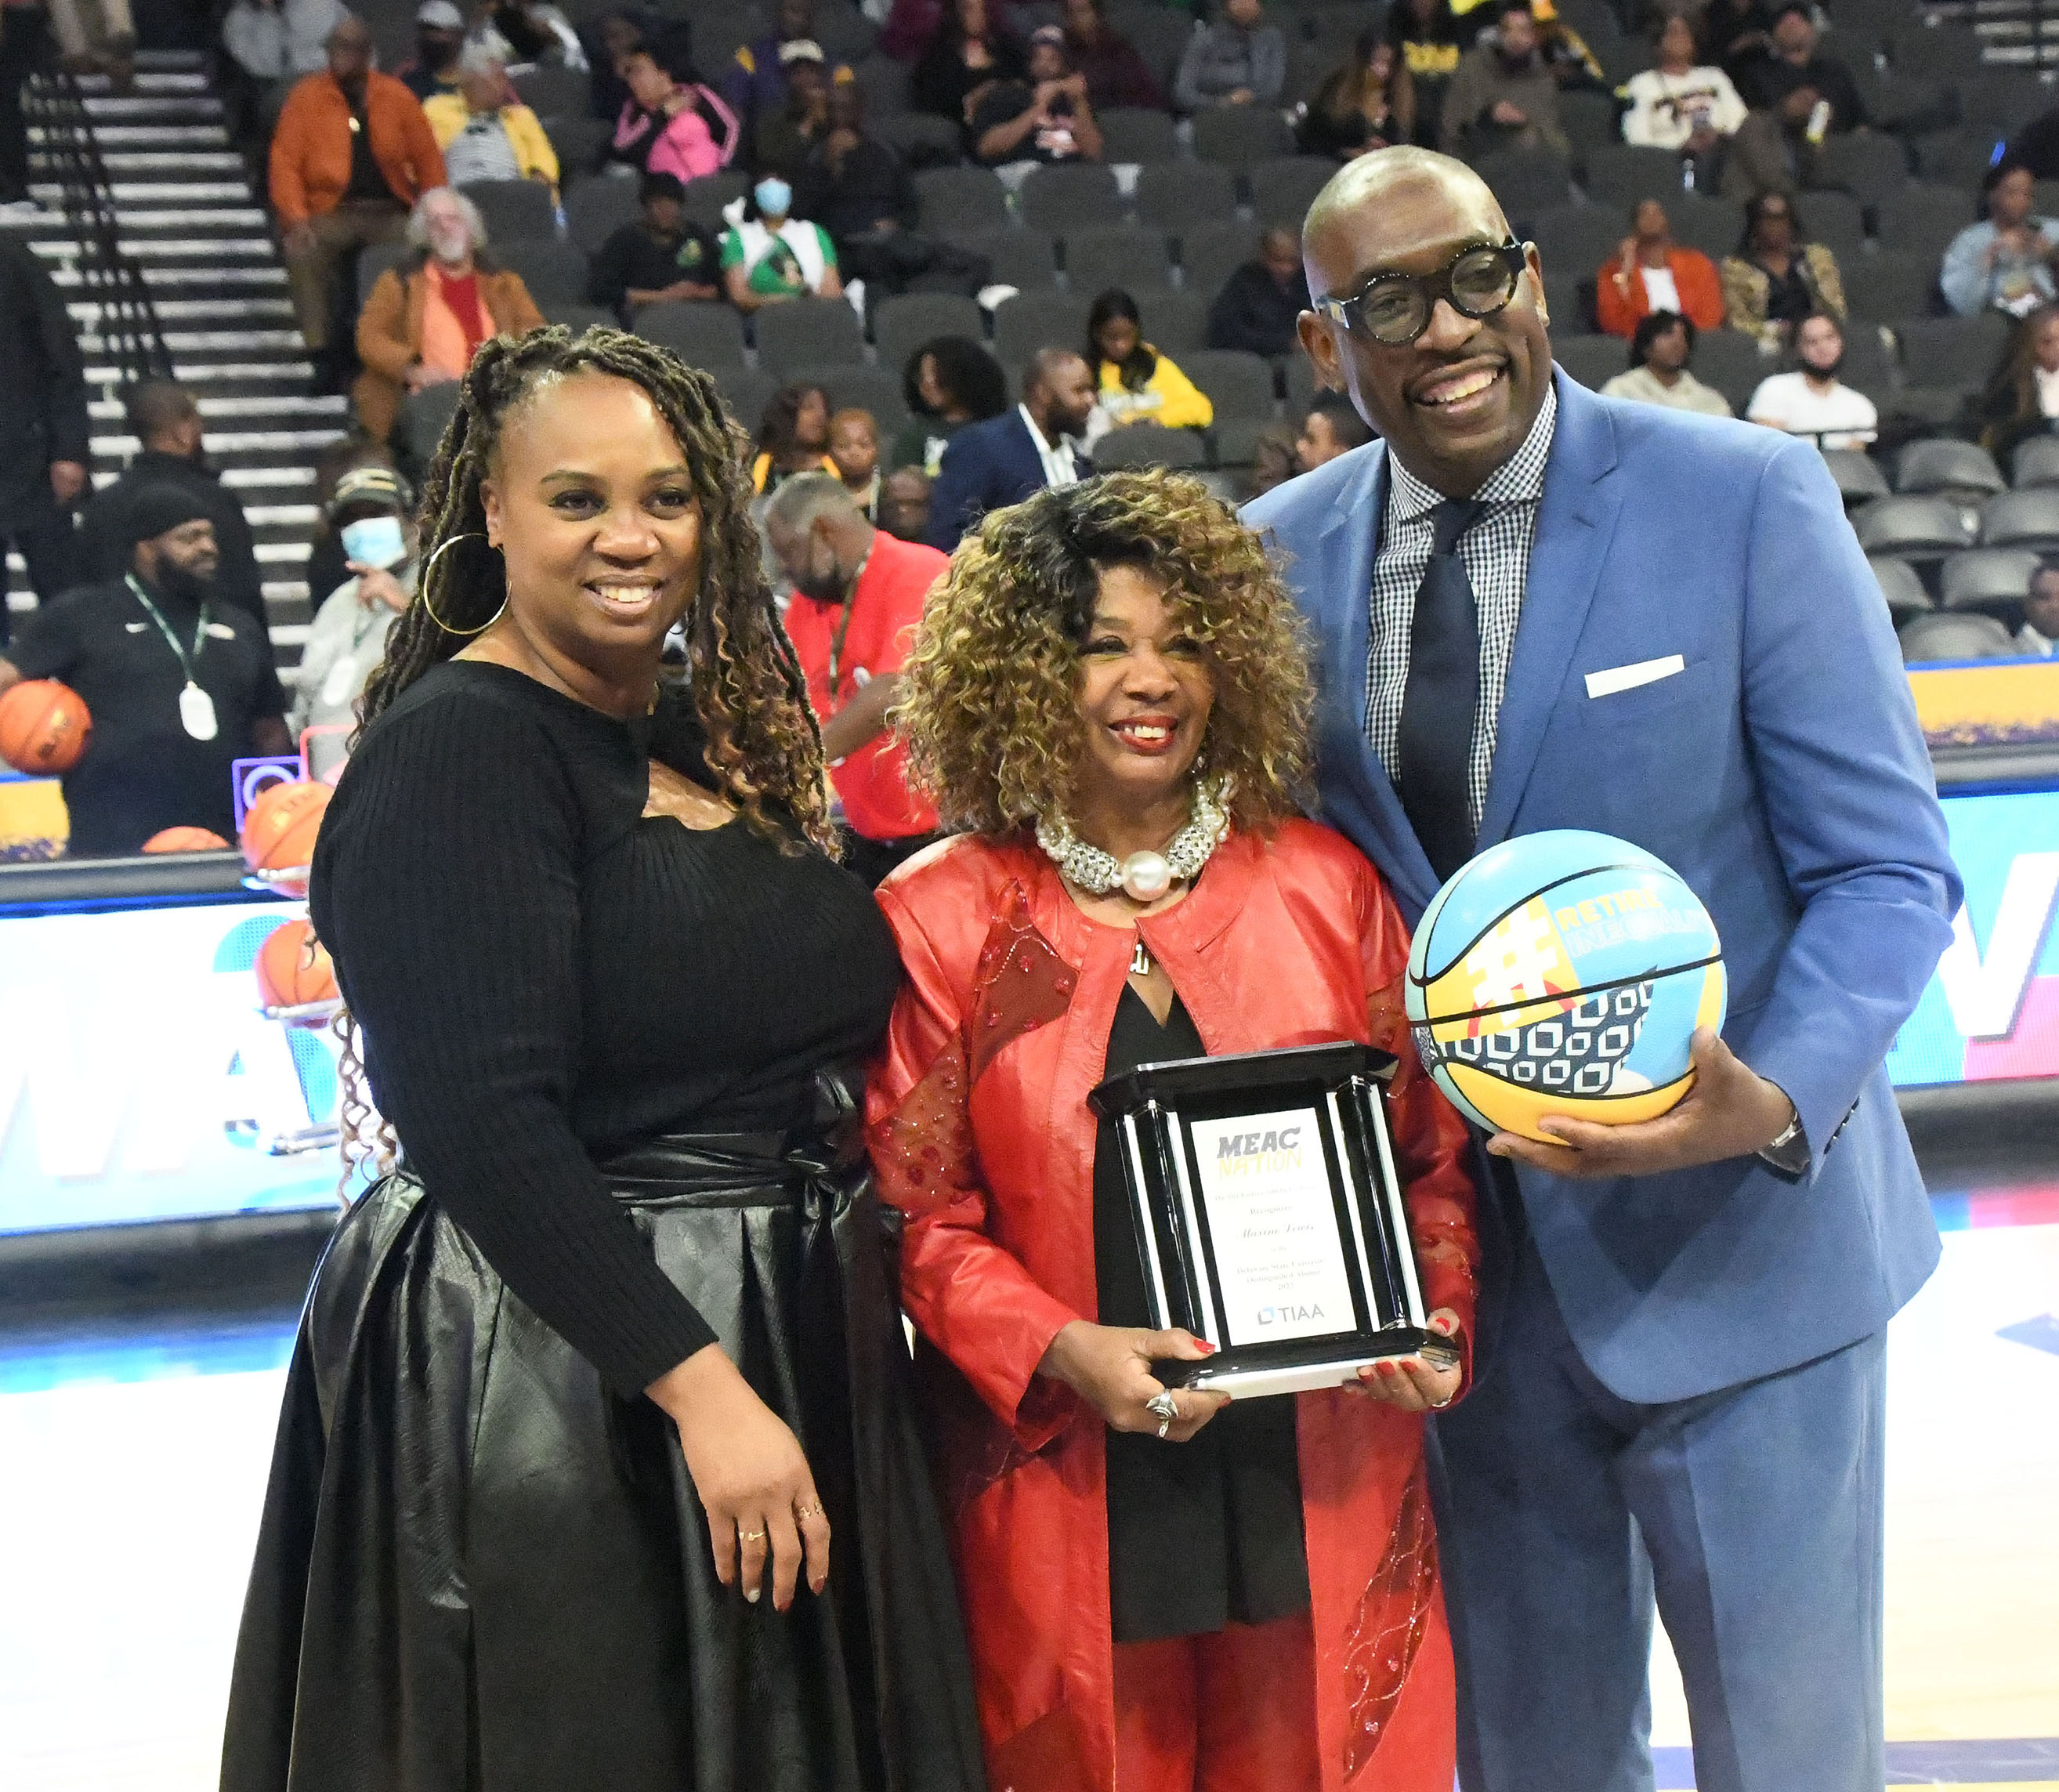 Maxine Lewis holds her Distinguished Alumnae Award standing with the MEAC Commissioner Sonja Sills and an unidentifed presenter.